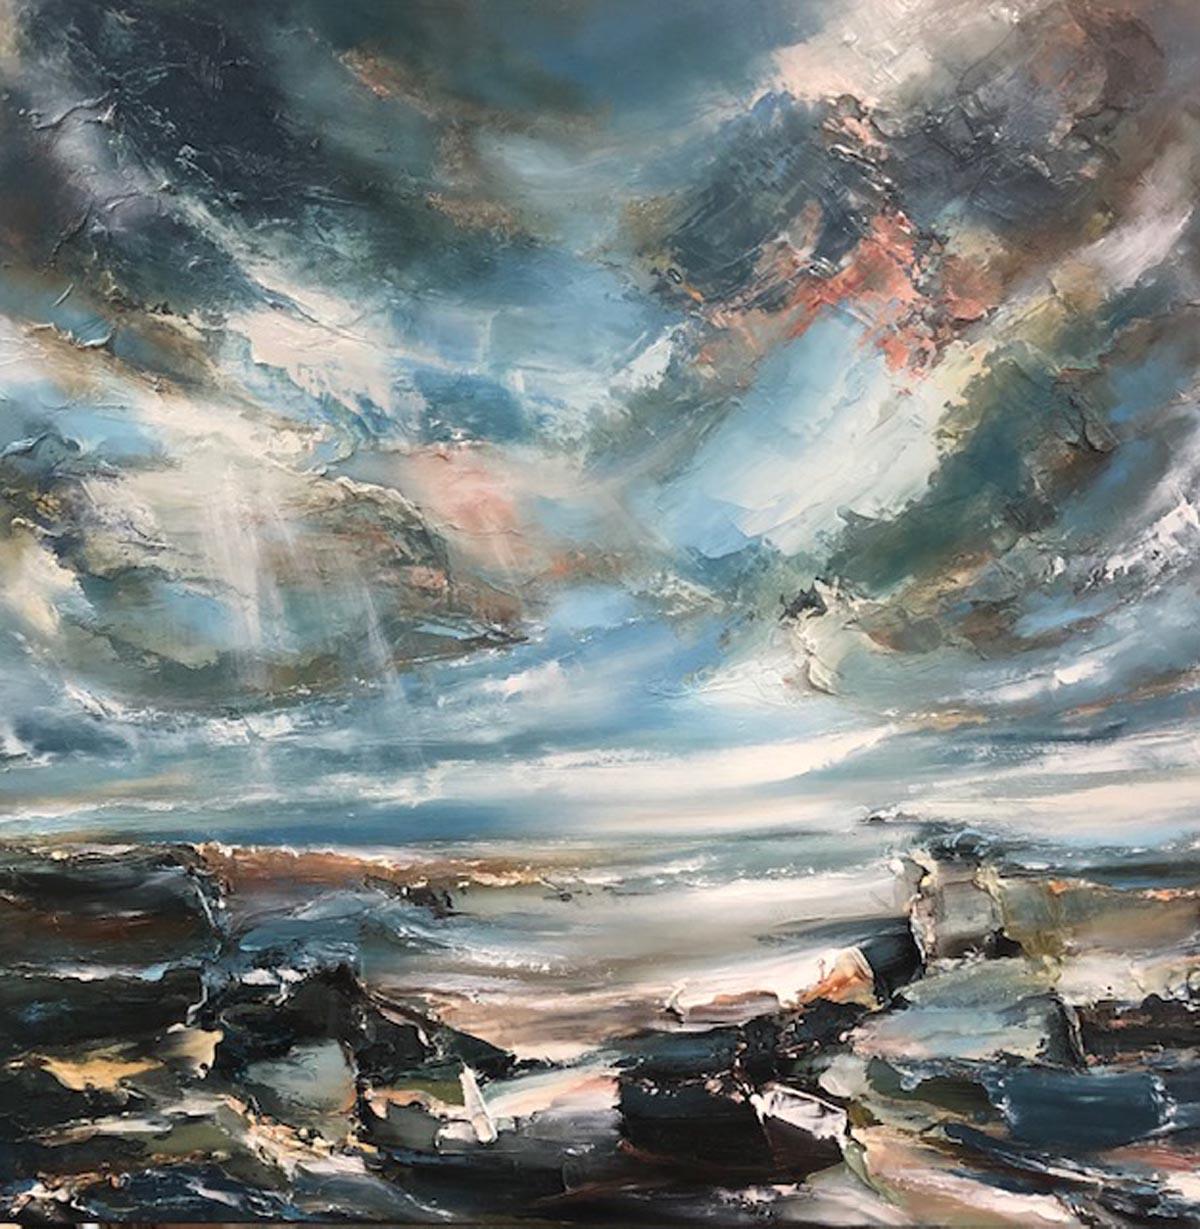 Helen Howells
Northwest
Original Oil Painting on Canvas
Oil Paint on Canvas
Canvas size: H 91cm x W 91cm x D 3.5cm
Sold Unframed
(Please note that in situ images are purely an indication of how a piece may look.)

Northwest is an original seascape